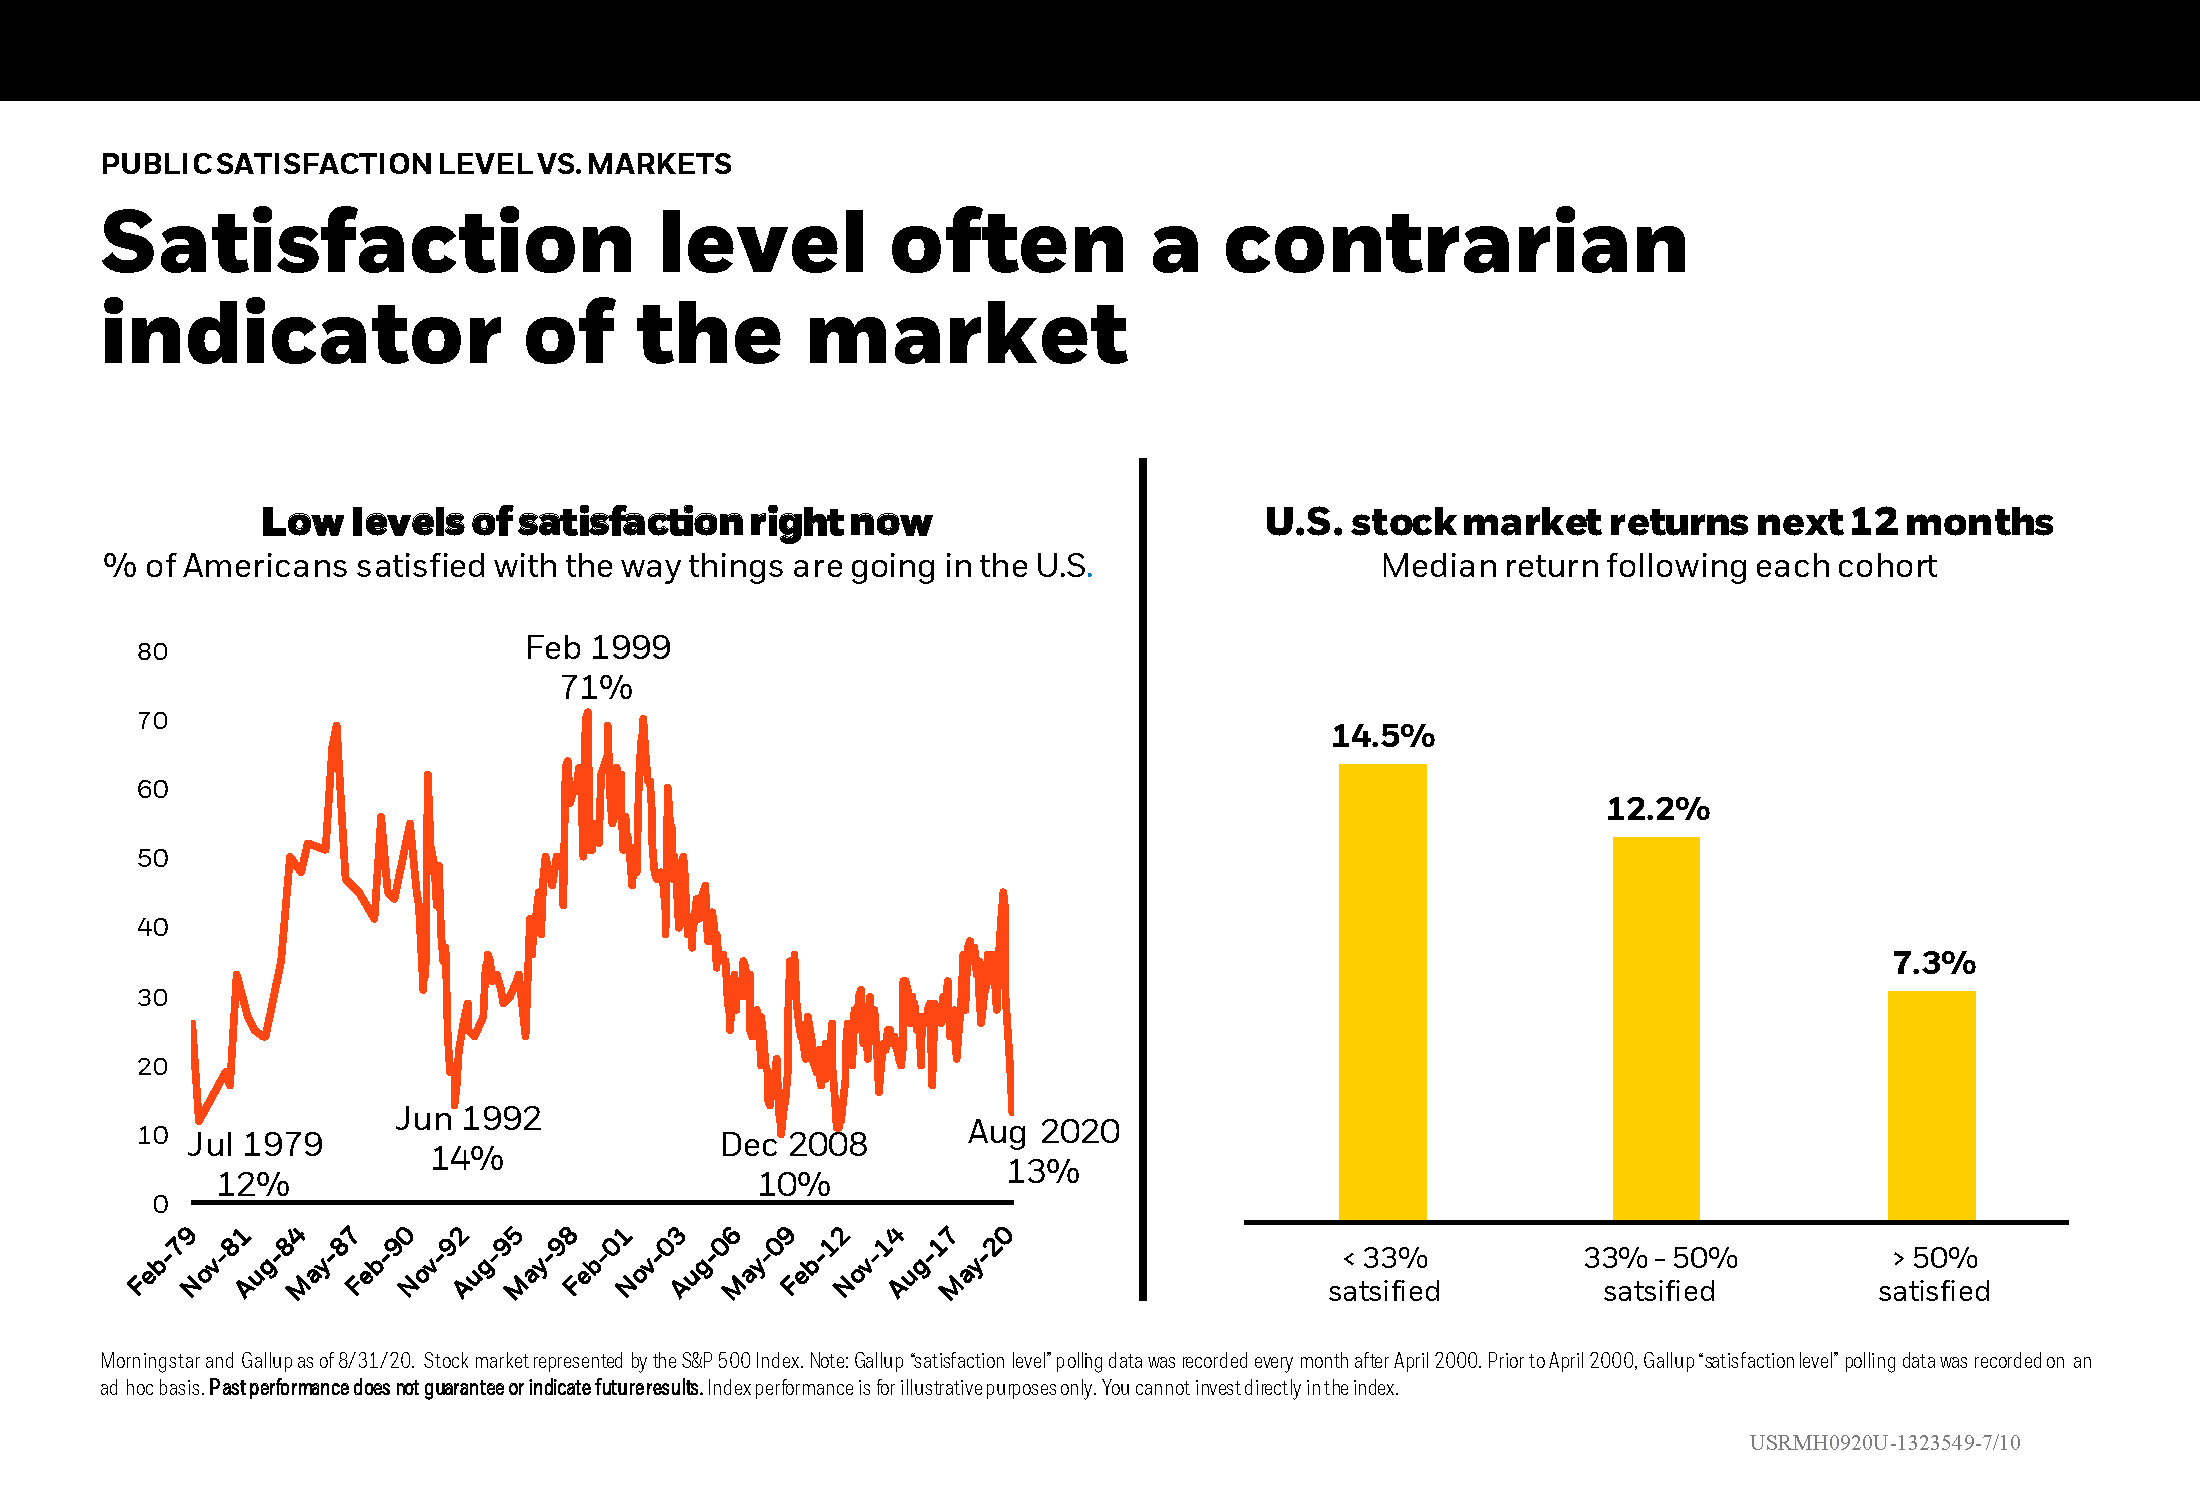 Satisfaction level often a contrarian indicator of the market